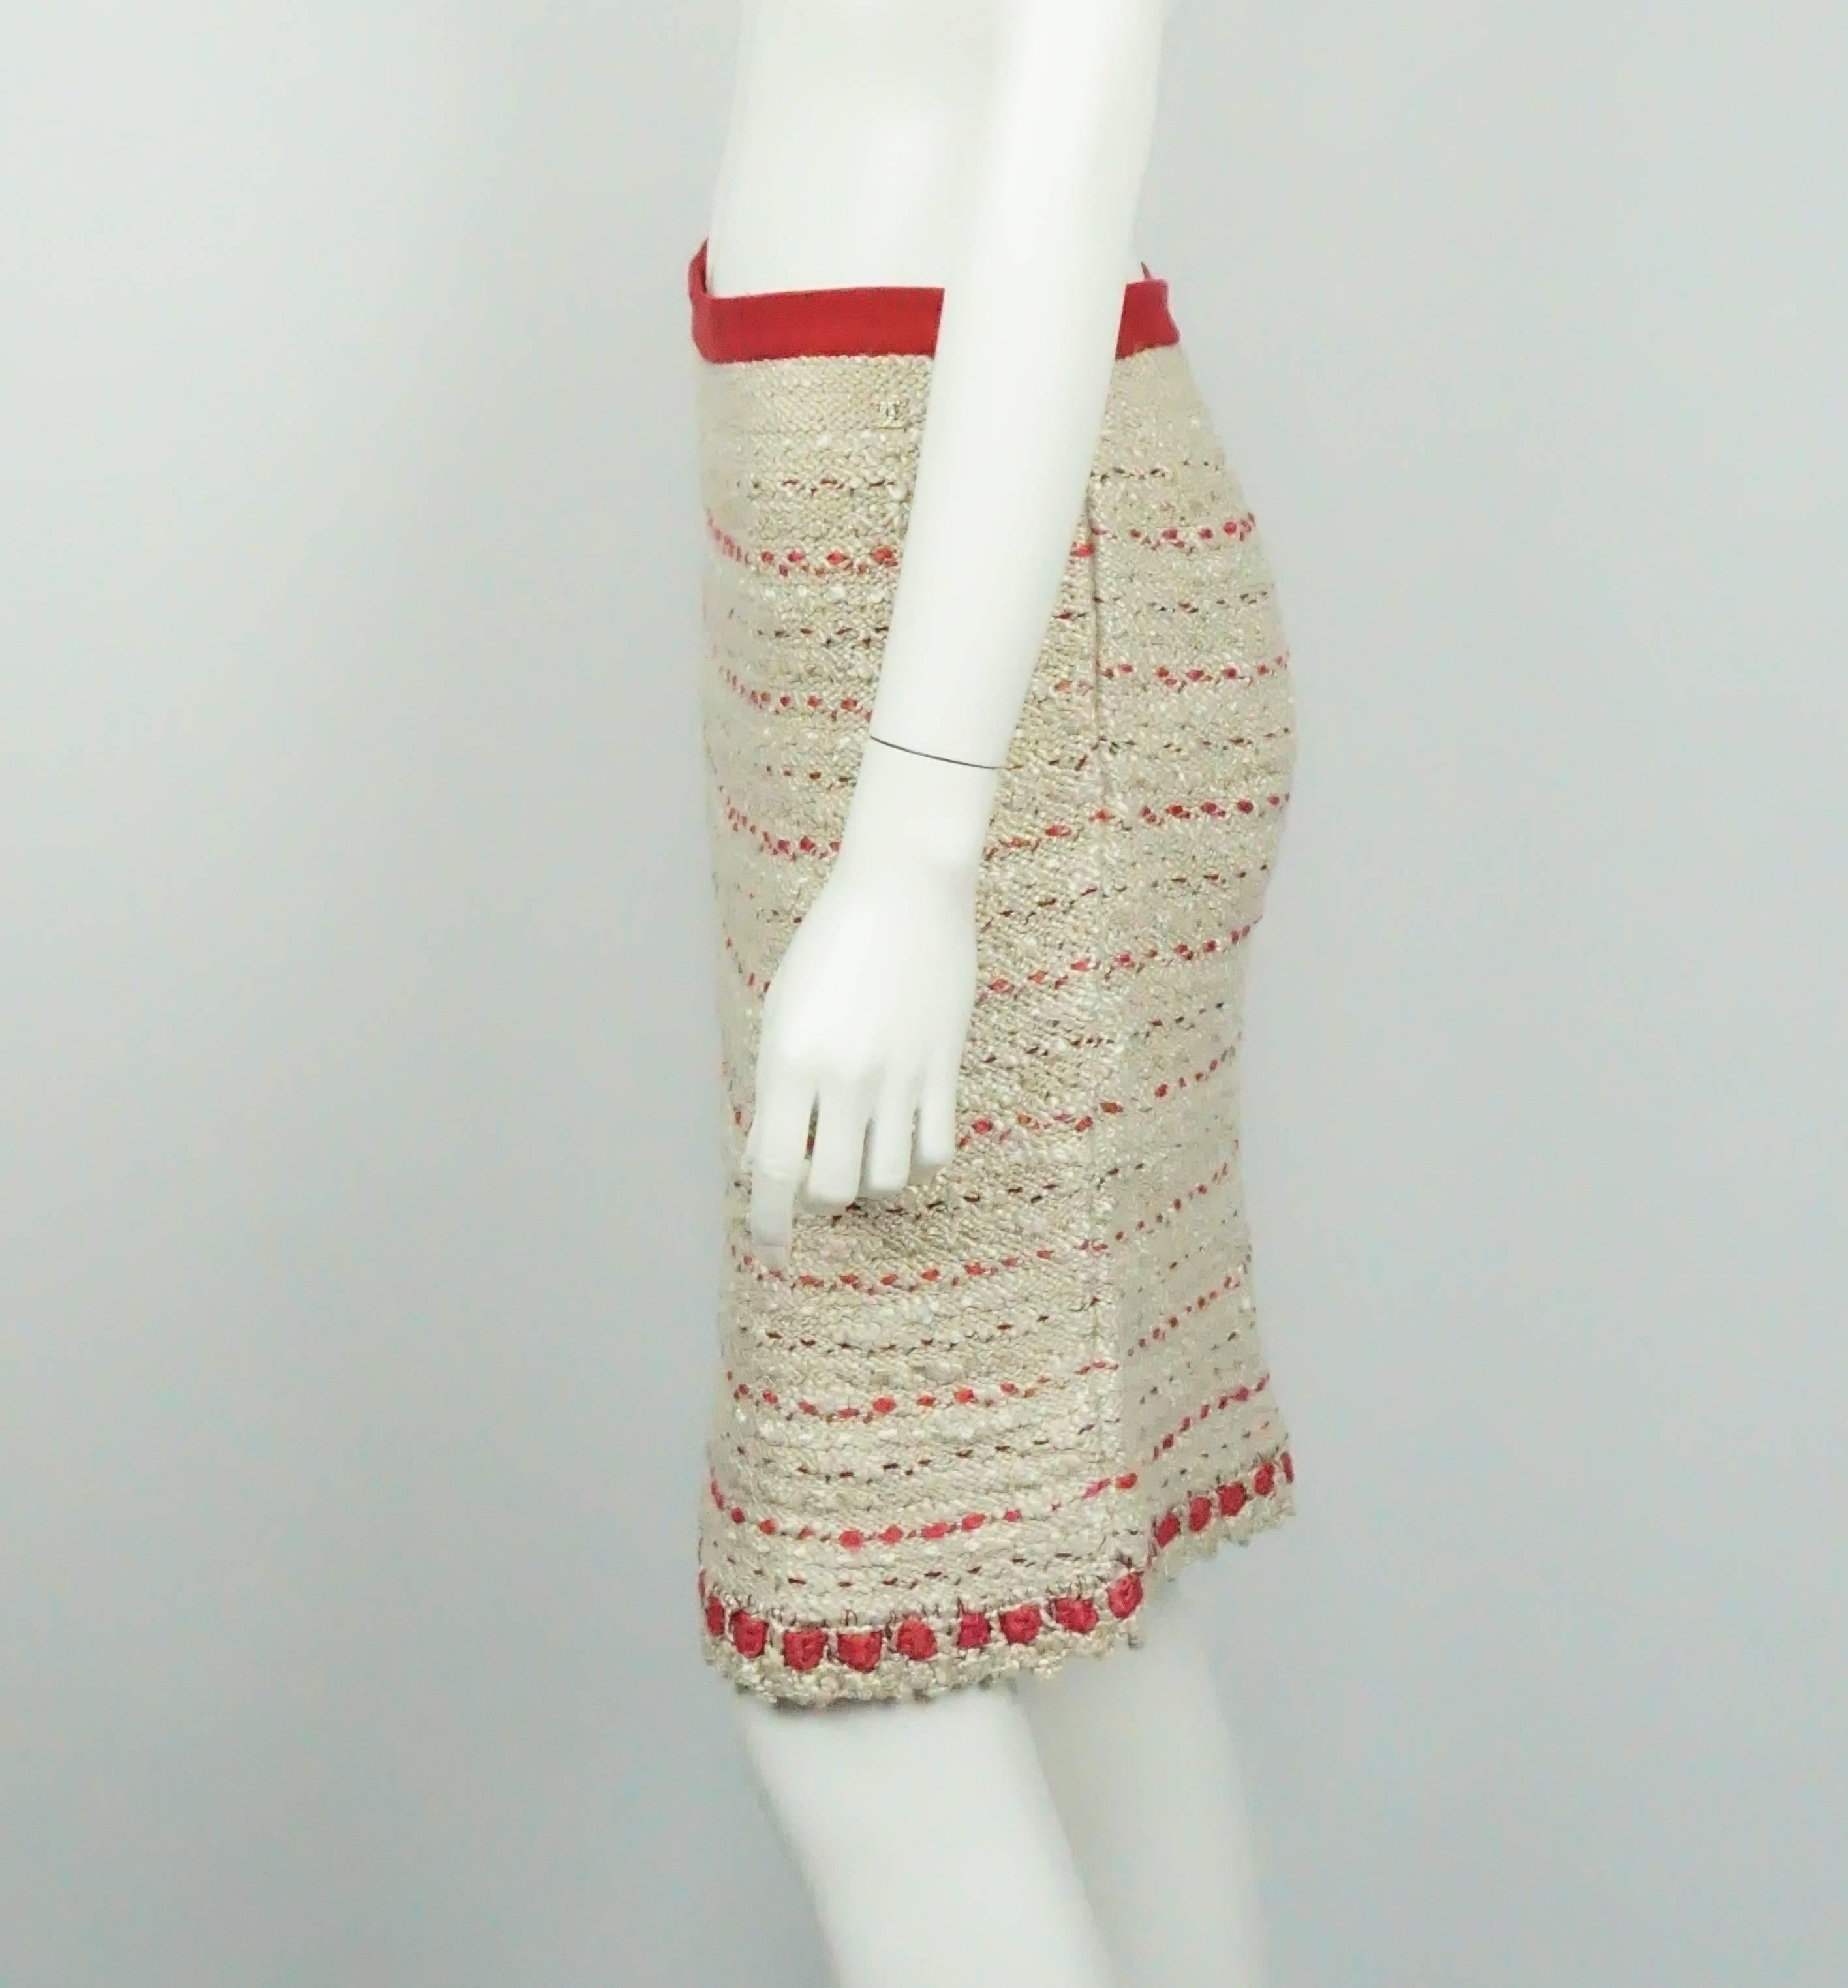 Chanel Cream and Red Silk Knit Skirt  - 38 - 06P  This beautiful Chanel Skirt is made primarily of a silk and cotton blend knit with a horizontal pattern. The skirt has a red knit 1 inch waistband with a side zipper. It has a semi scalloped hemline